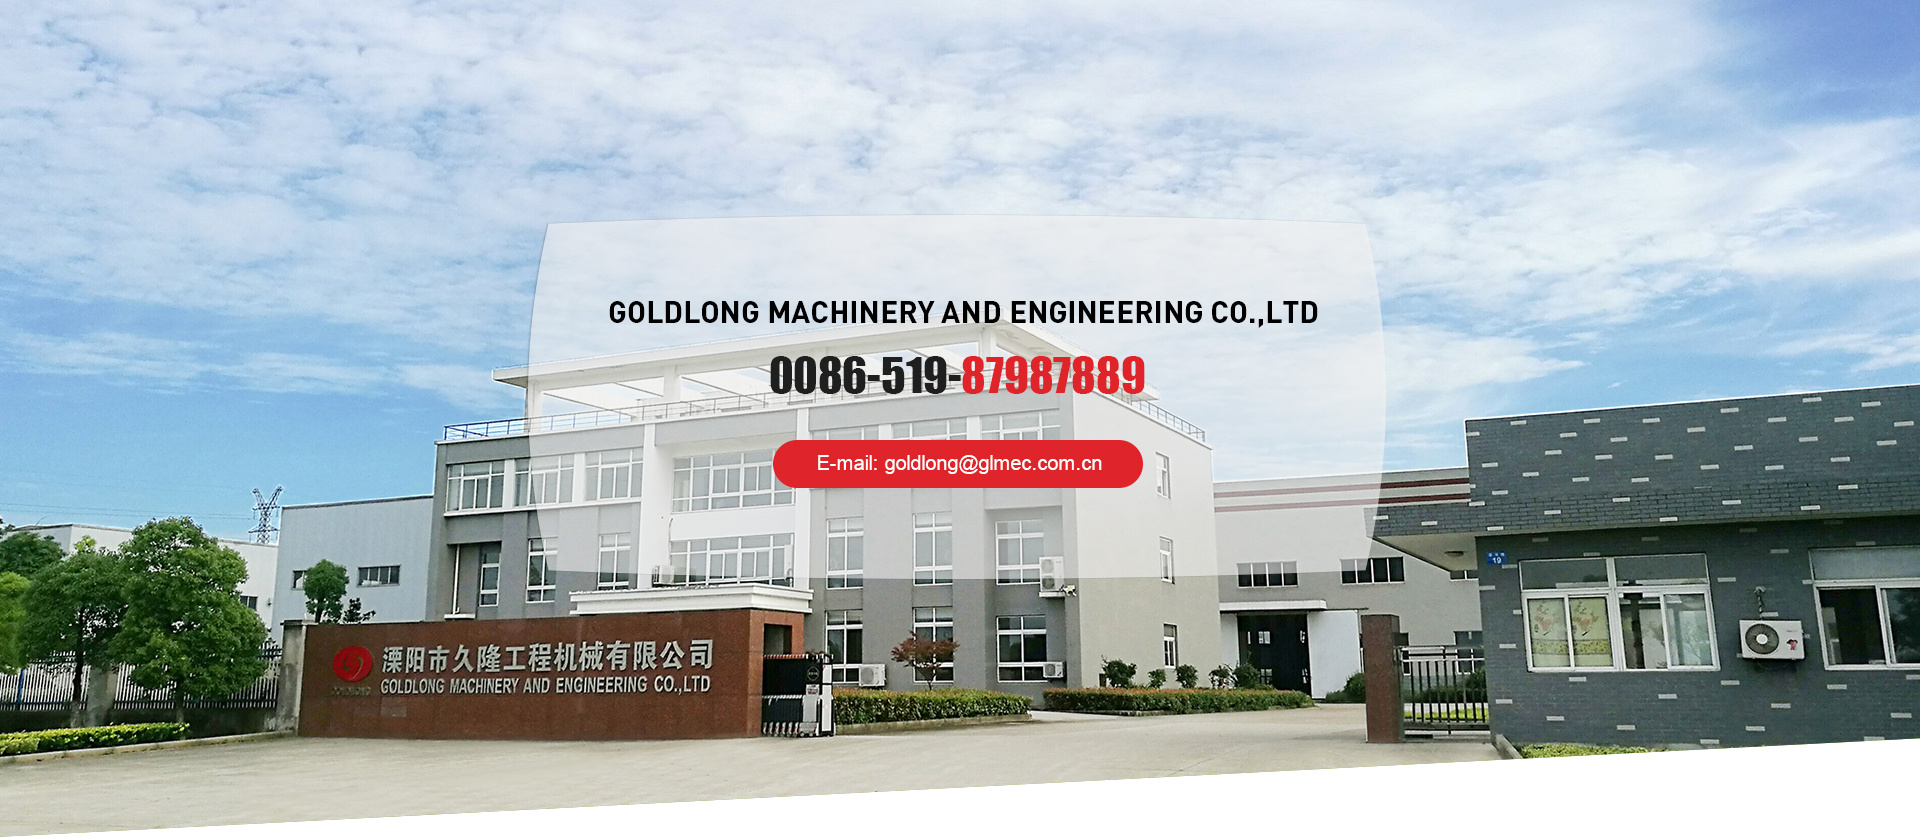 Goldlong Machinery And Engineering Co.,Ltd